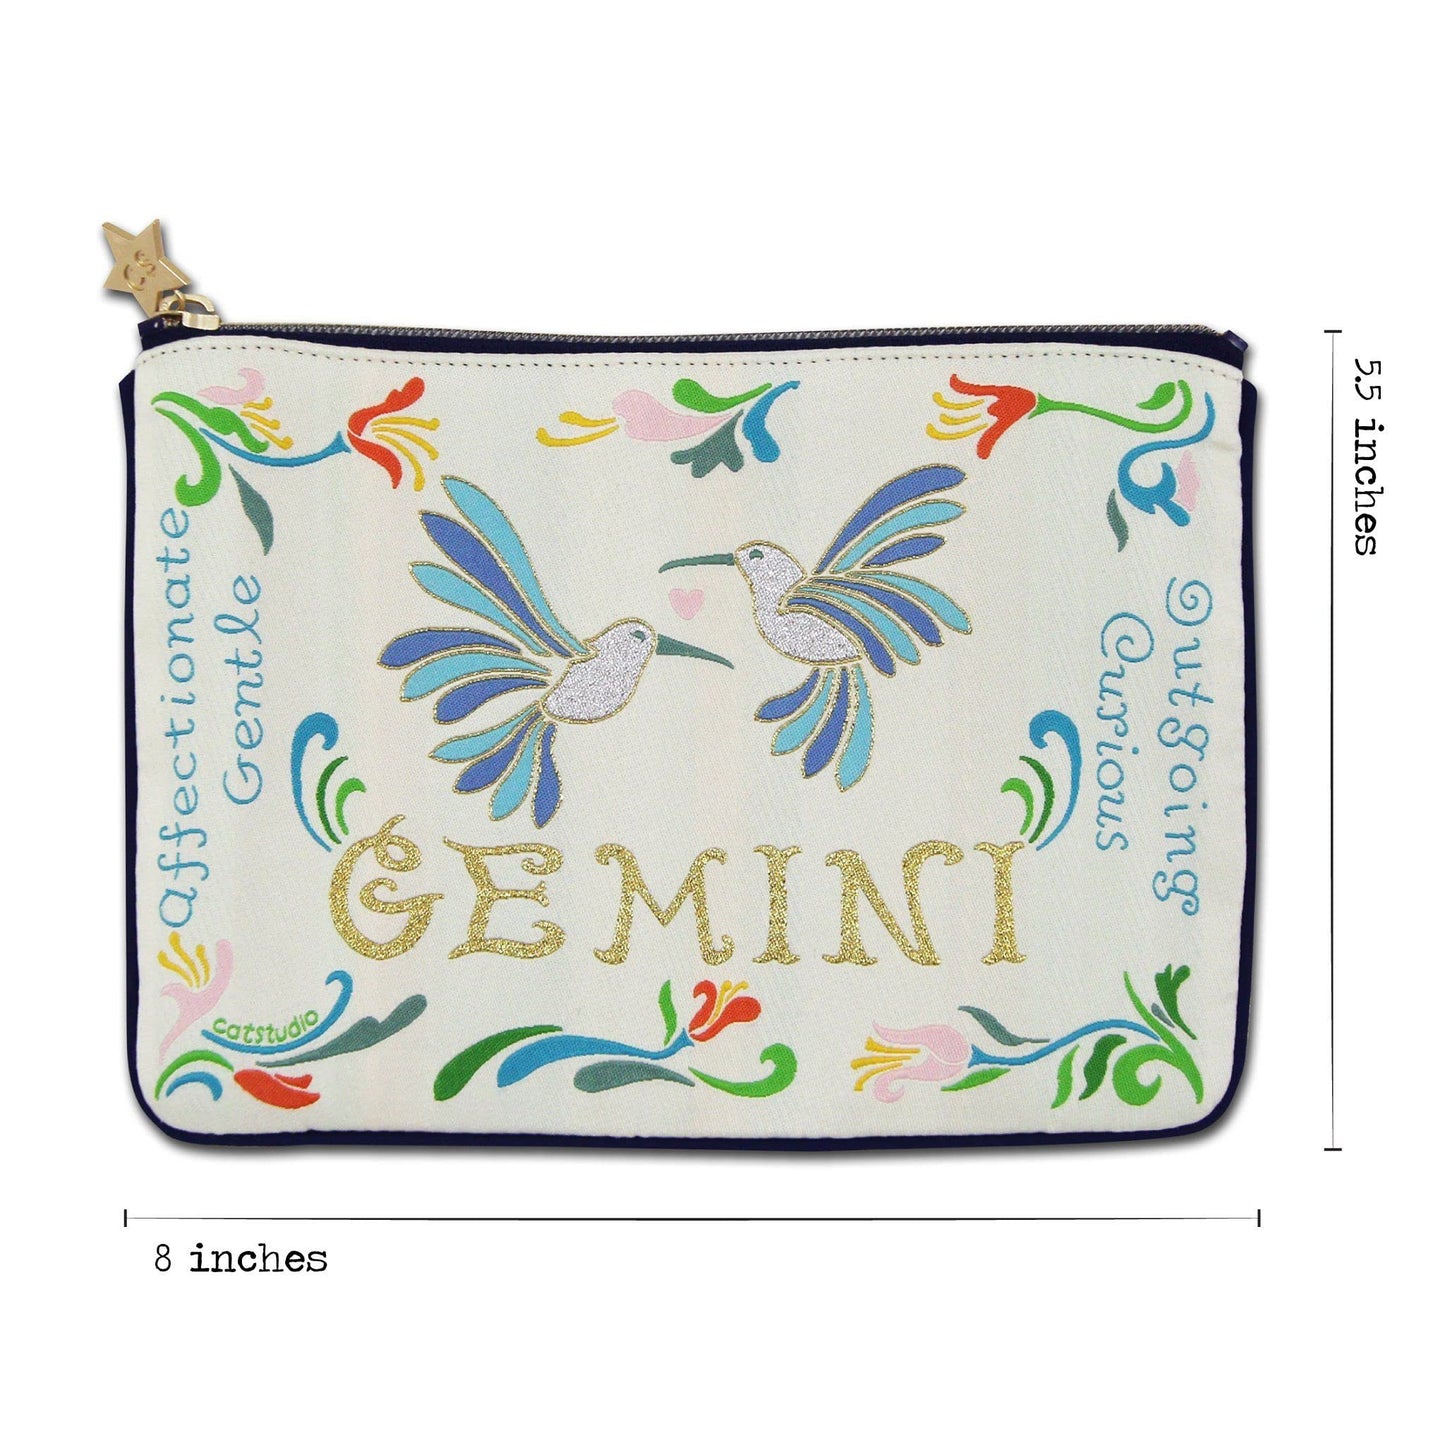 Catstudio Astrology Zipper Pouch, Gemini Zodiac Sign, Celebrate May & June Birthdays with Travel Toiletry Bag, 5 x 7, Ideal Gift for Geminis, Makeup Bag, Dog Treat Pouch, or Travel Purse Pouch